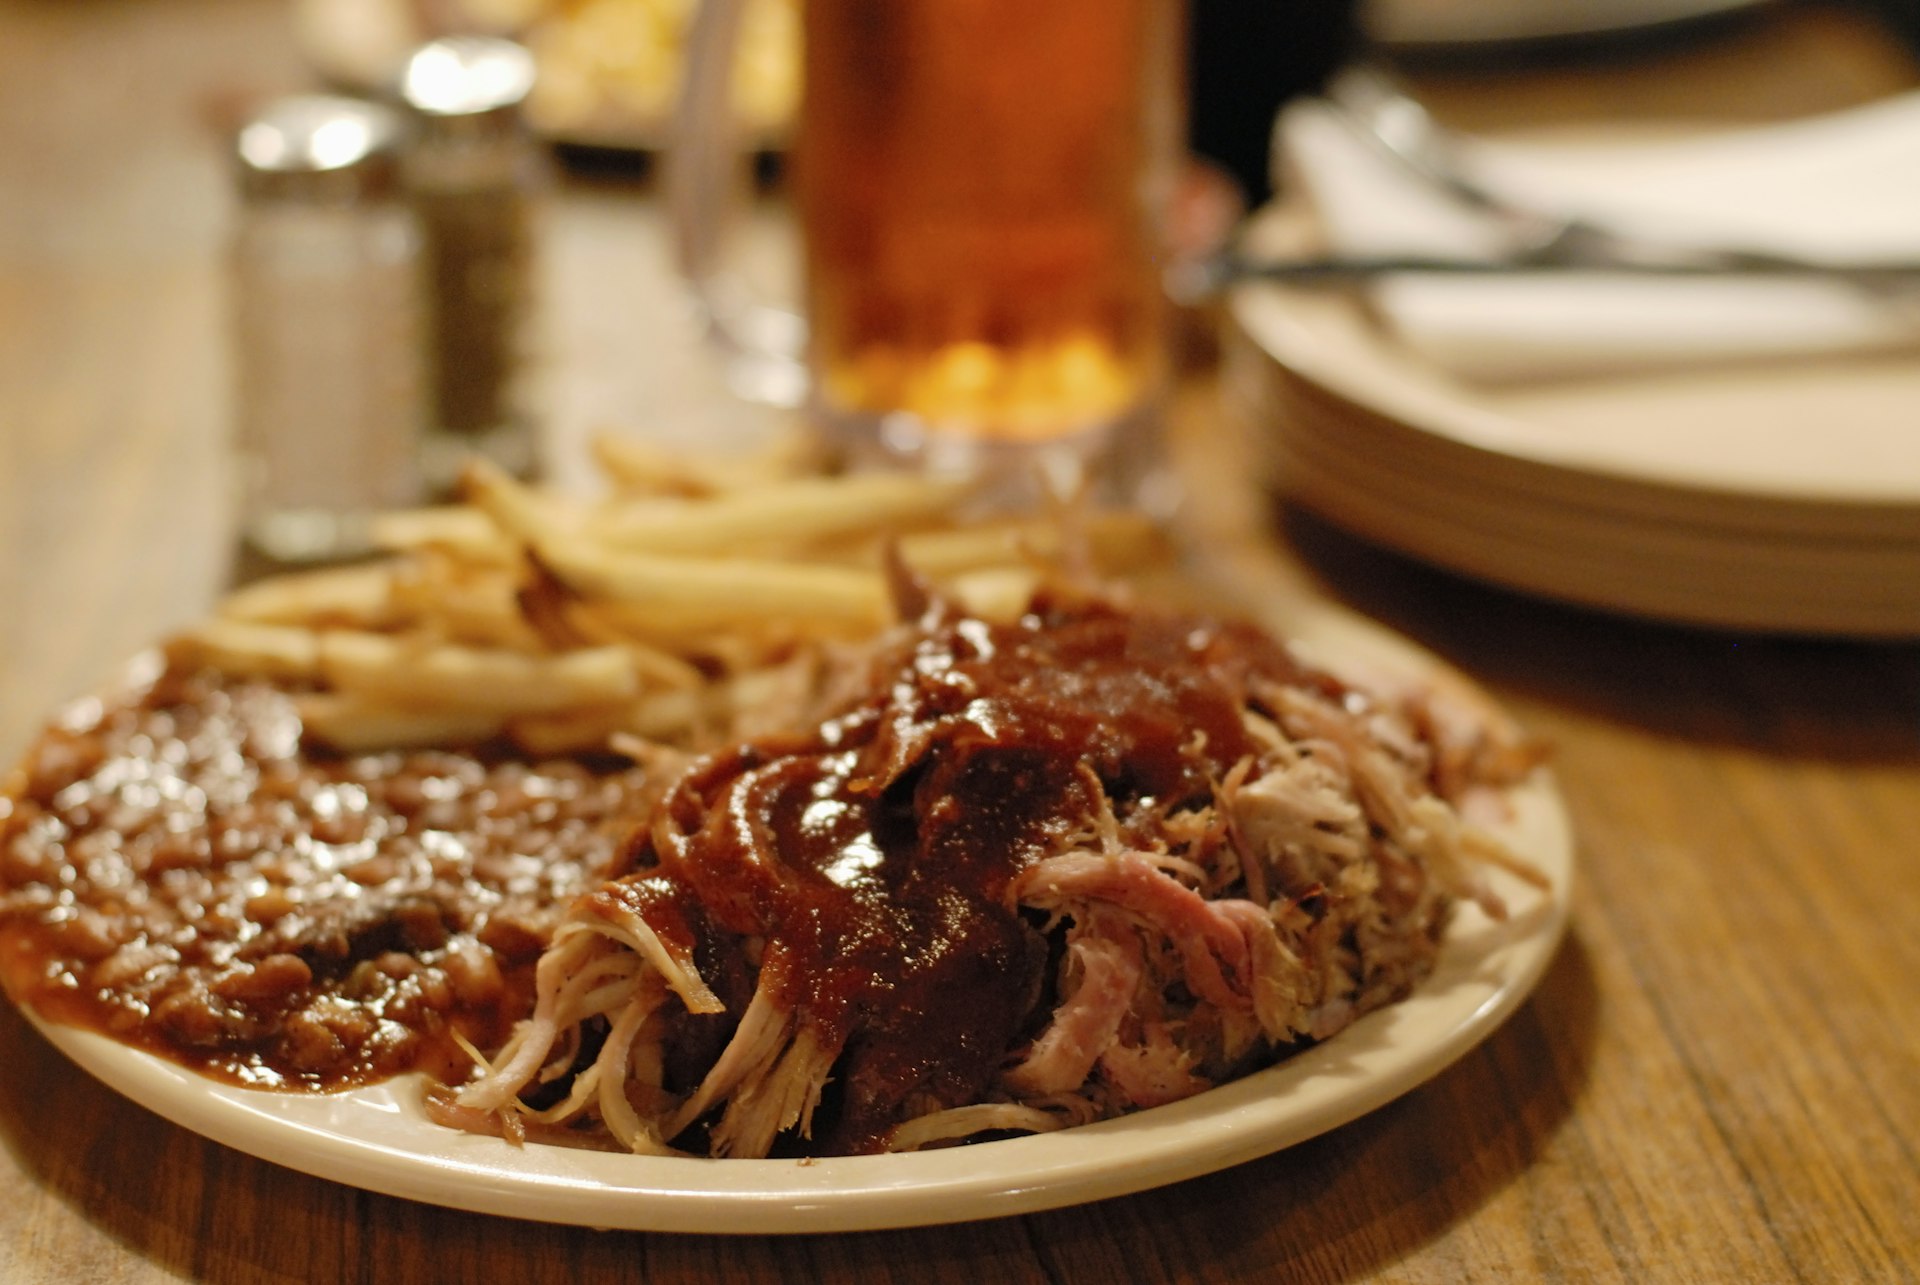 A close-up of a plate of Memphis barbecue